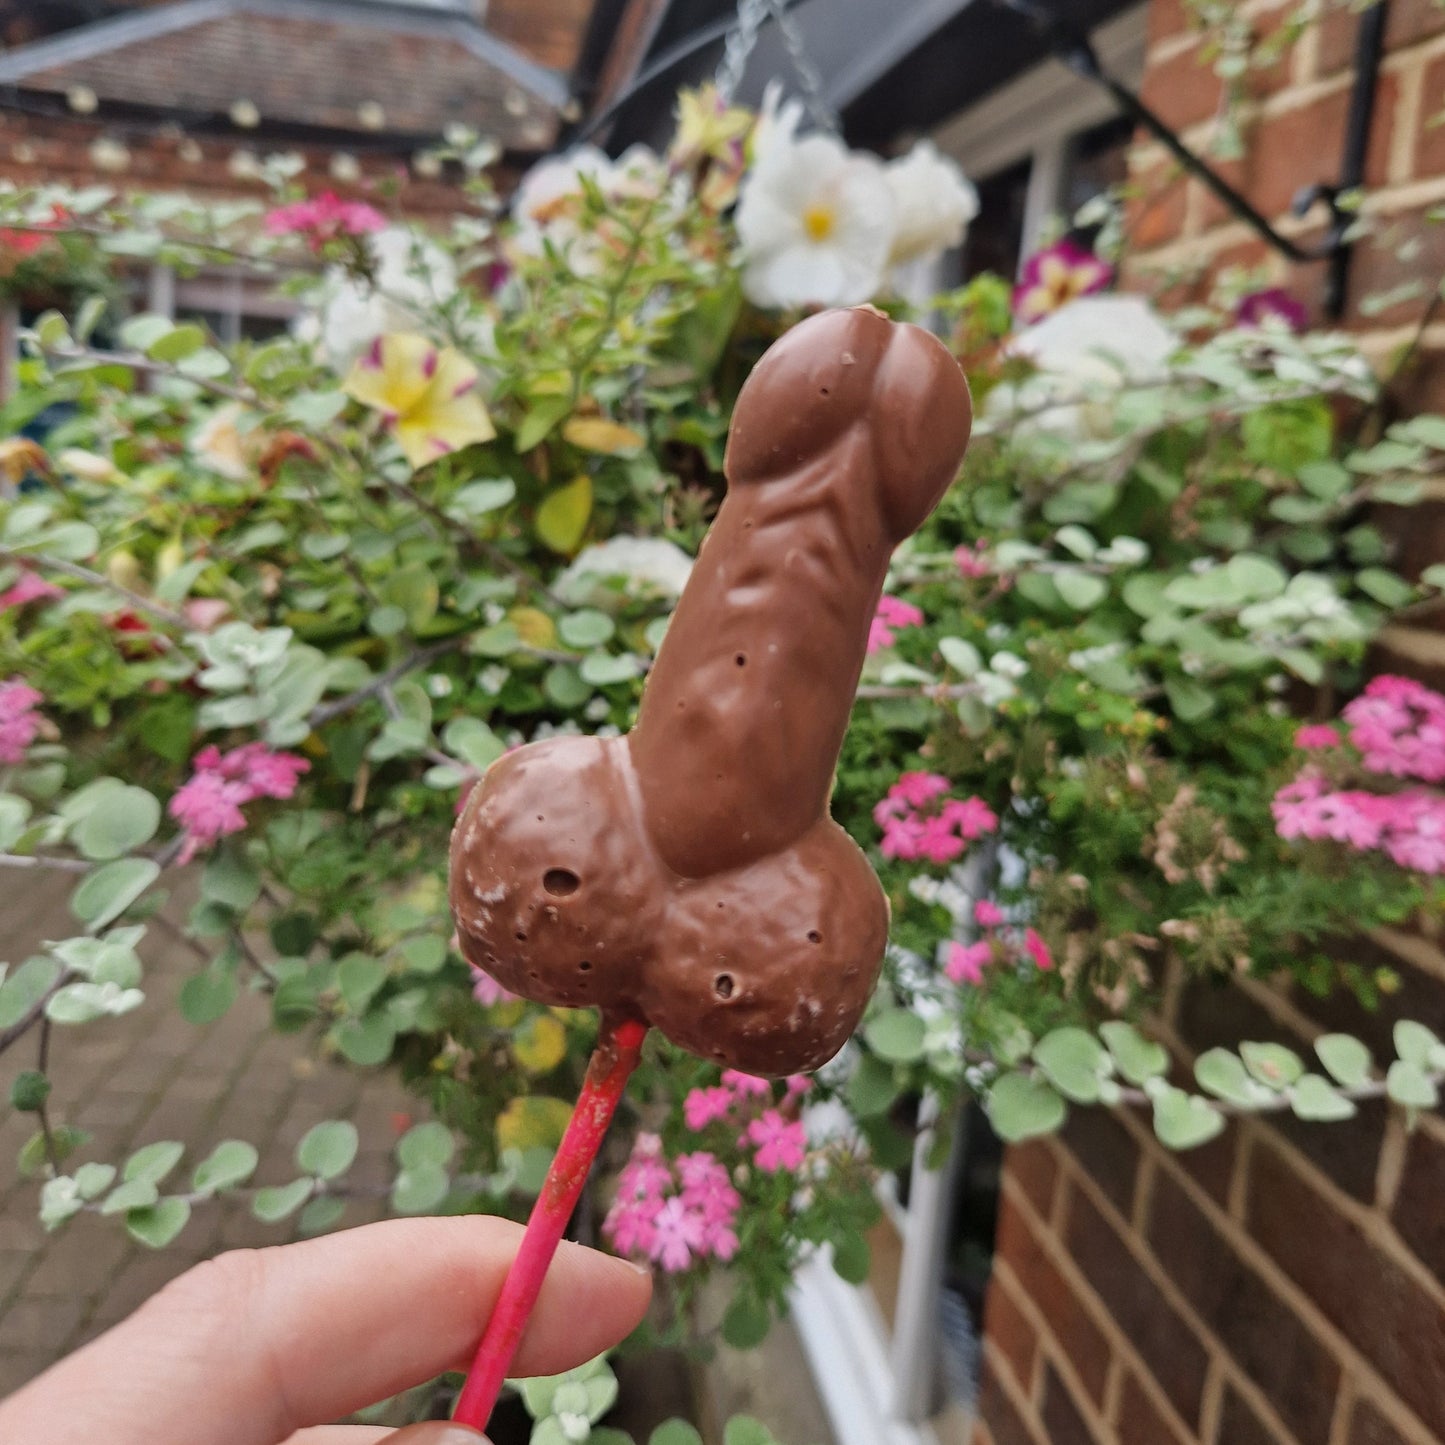 Dick Chocolate Lolly